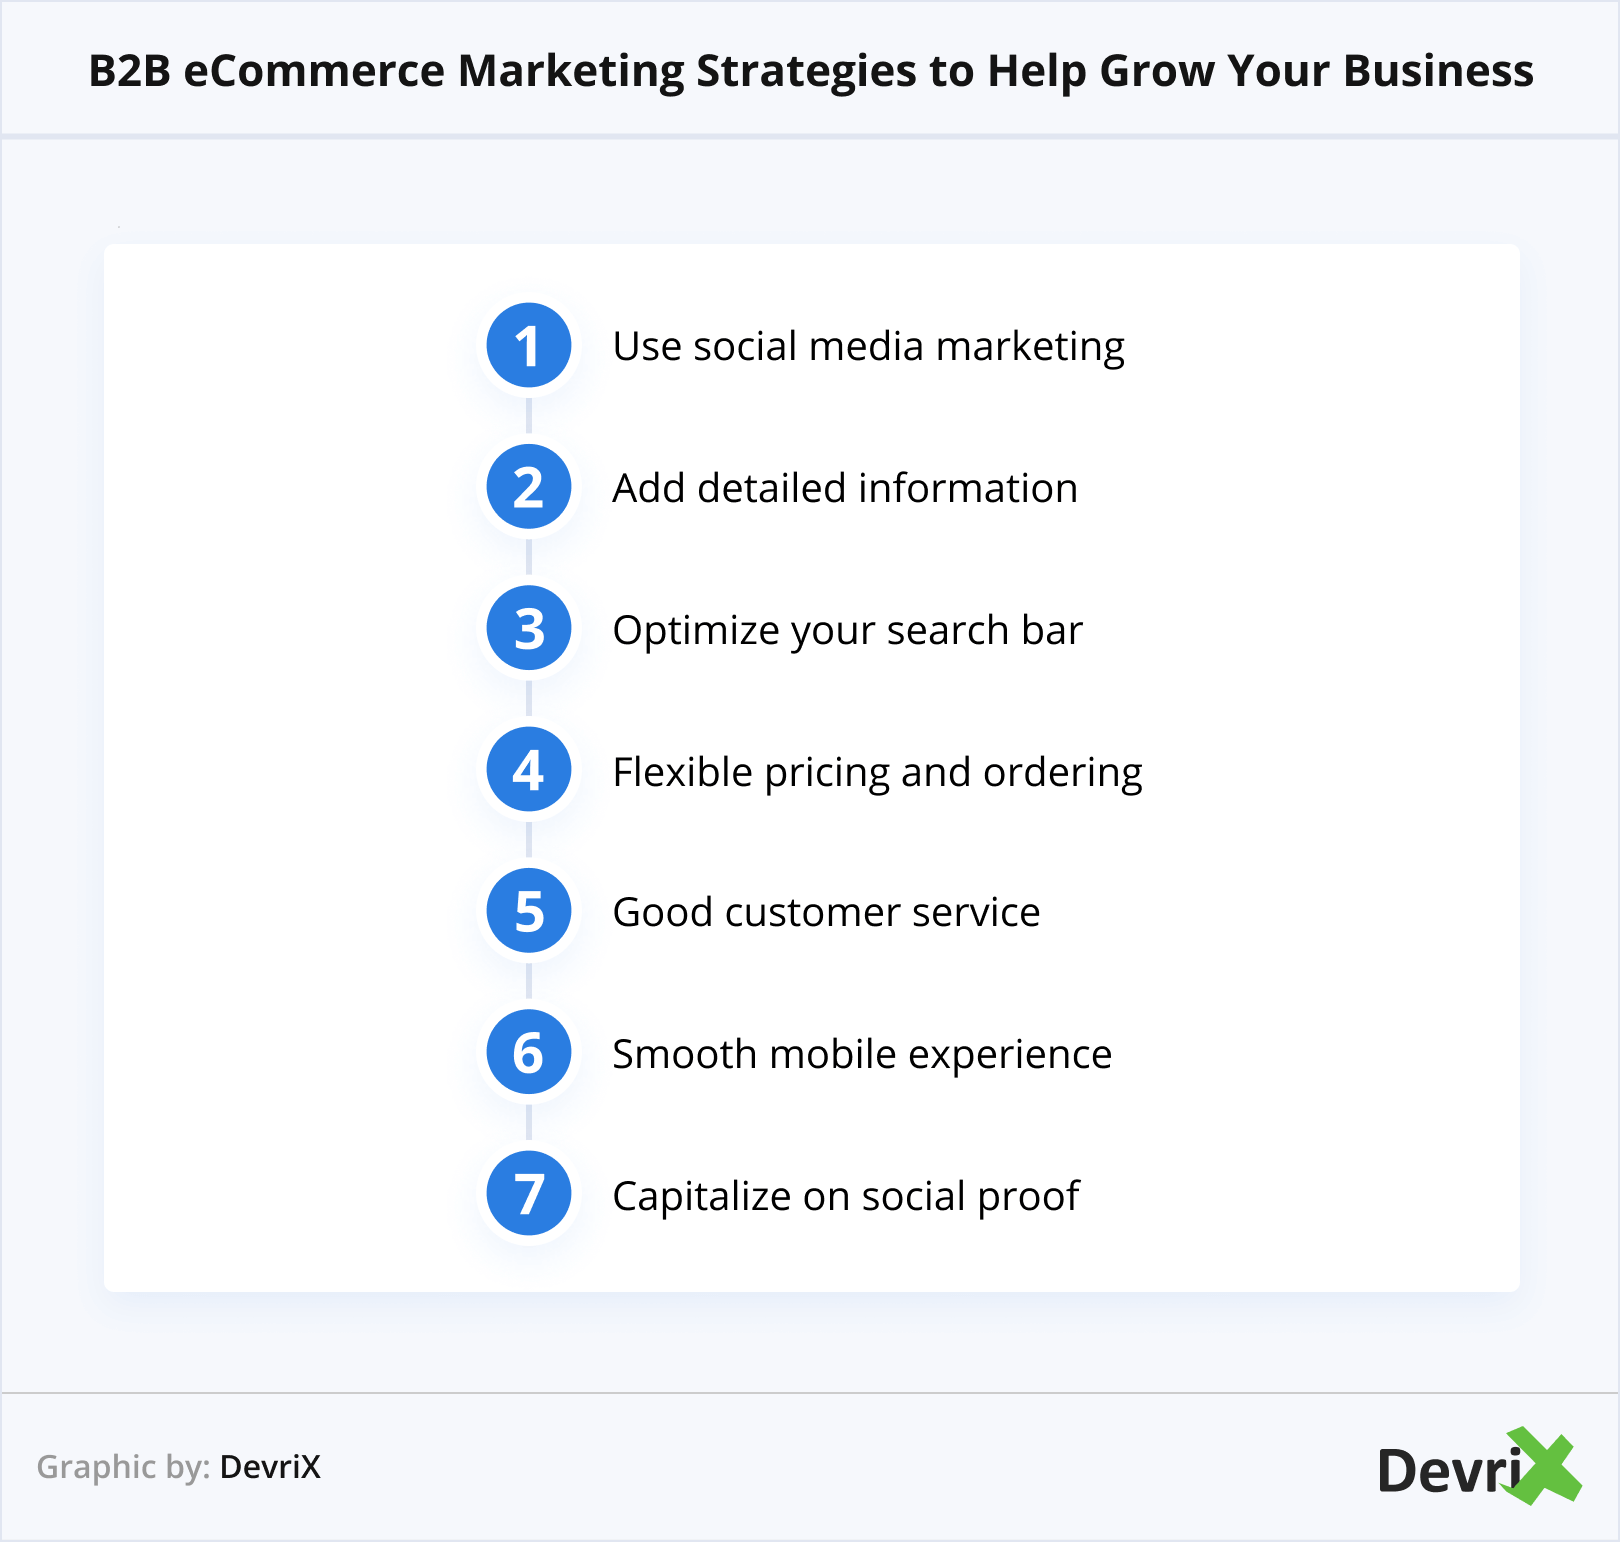 B2B eCommerce Marketing Strategies to Help Grow Your Business